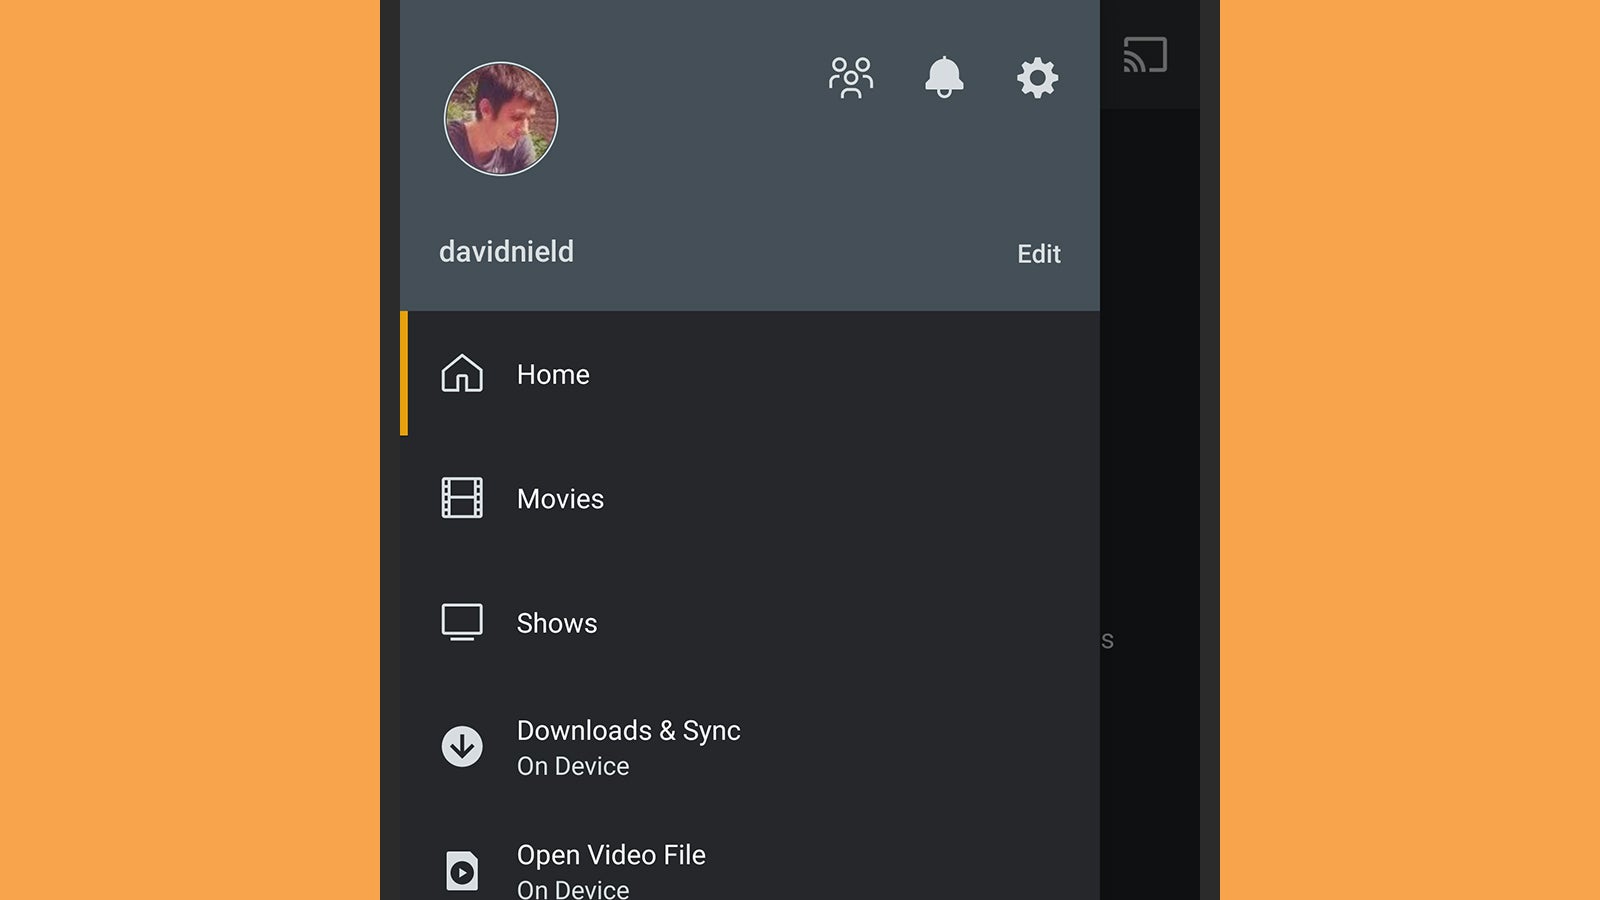 Your media files will appear sorted and organised on the devices you connect. (Screenshot: Android)